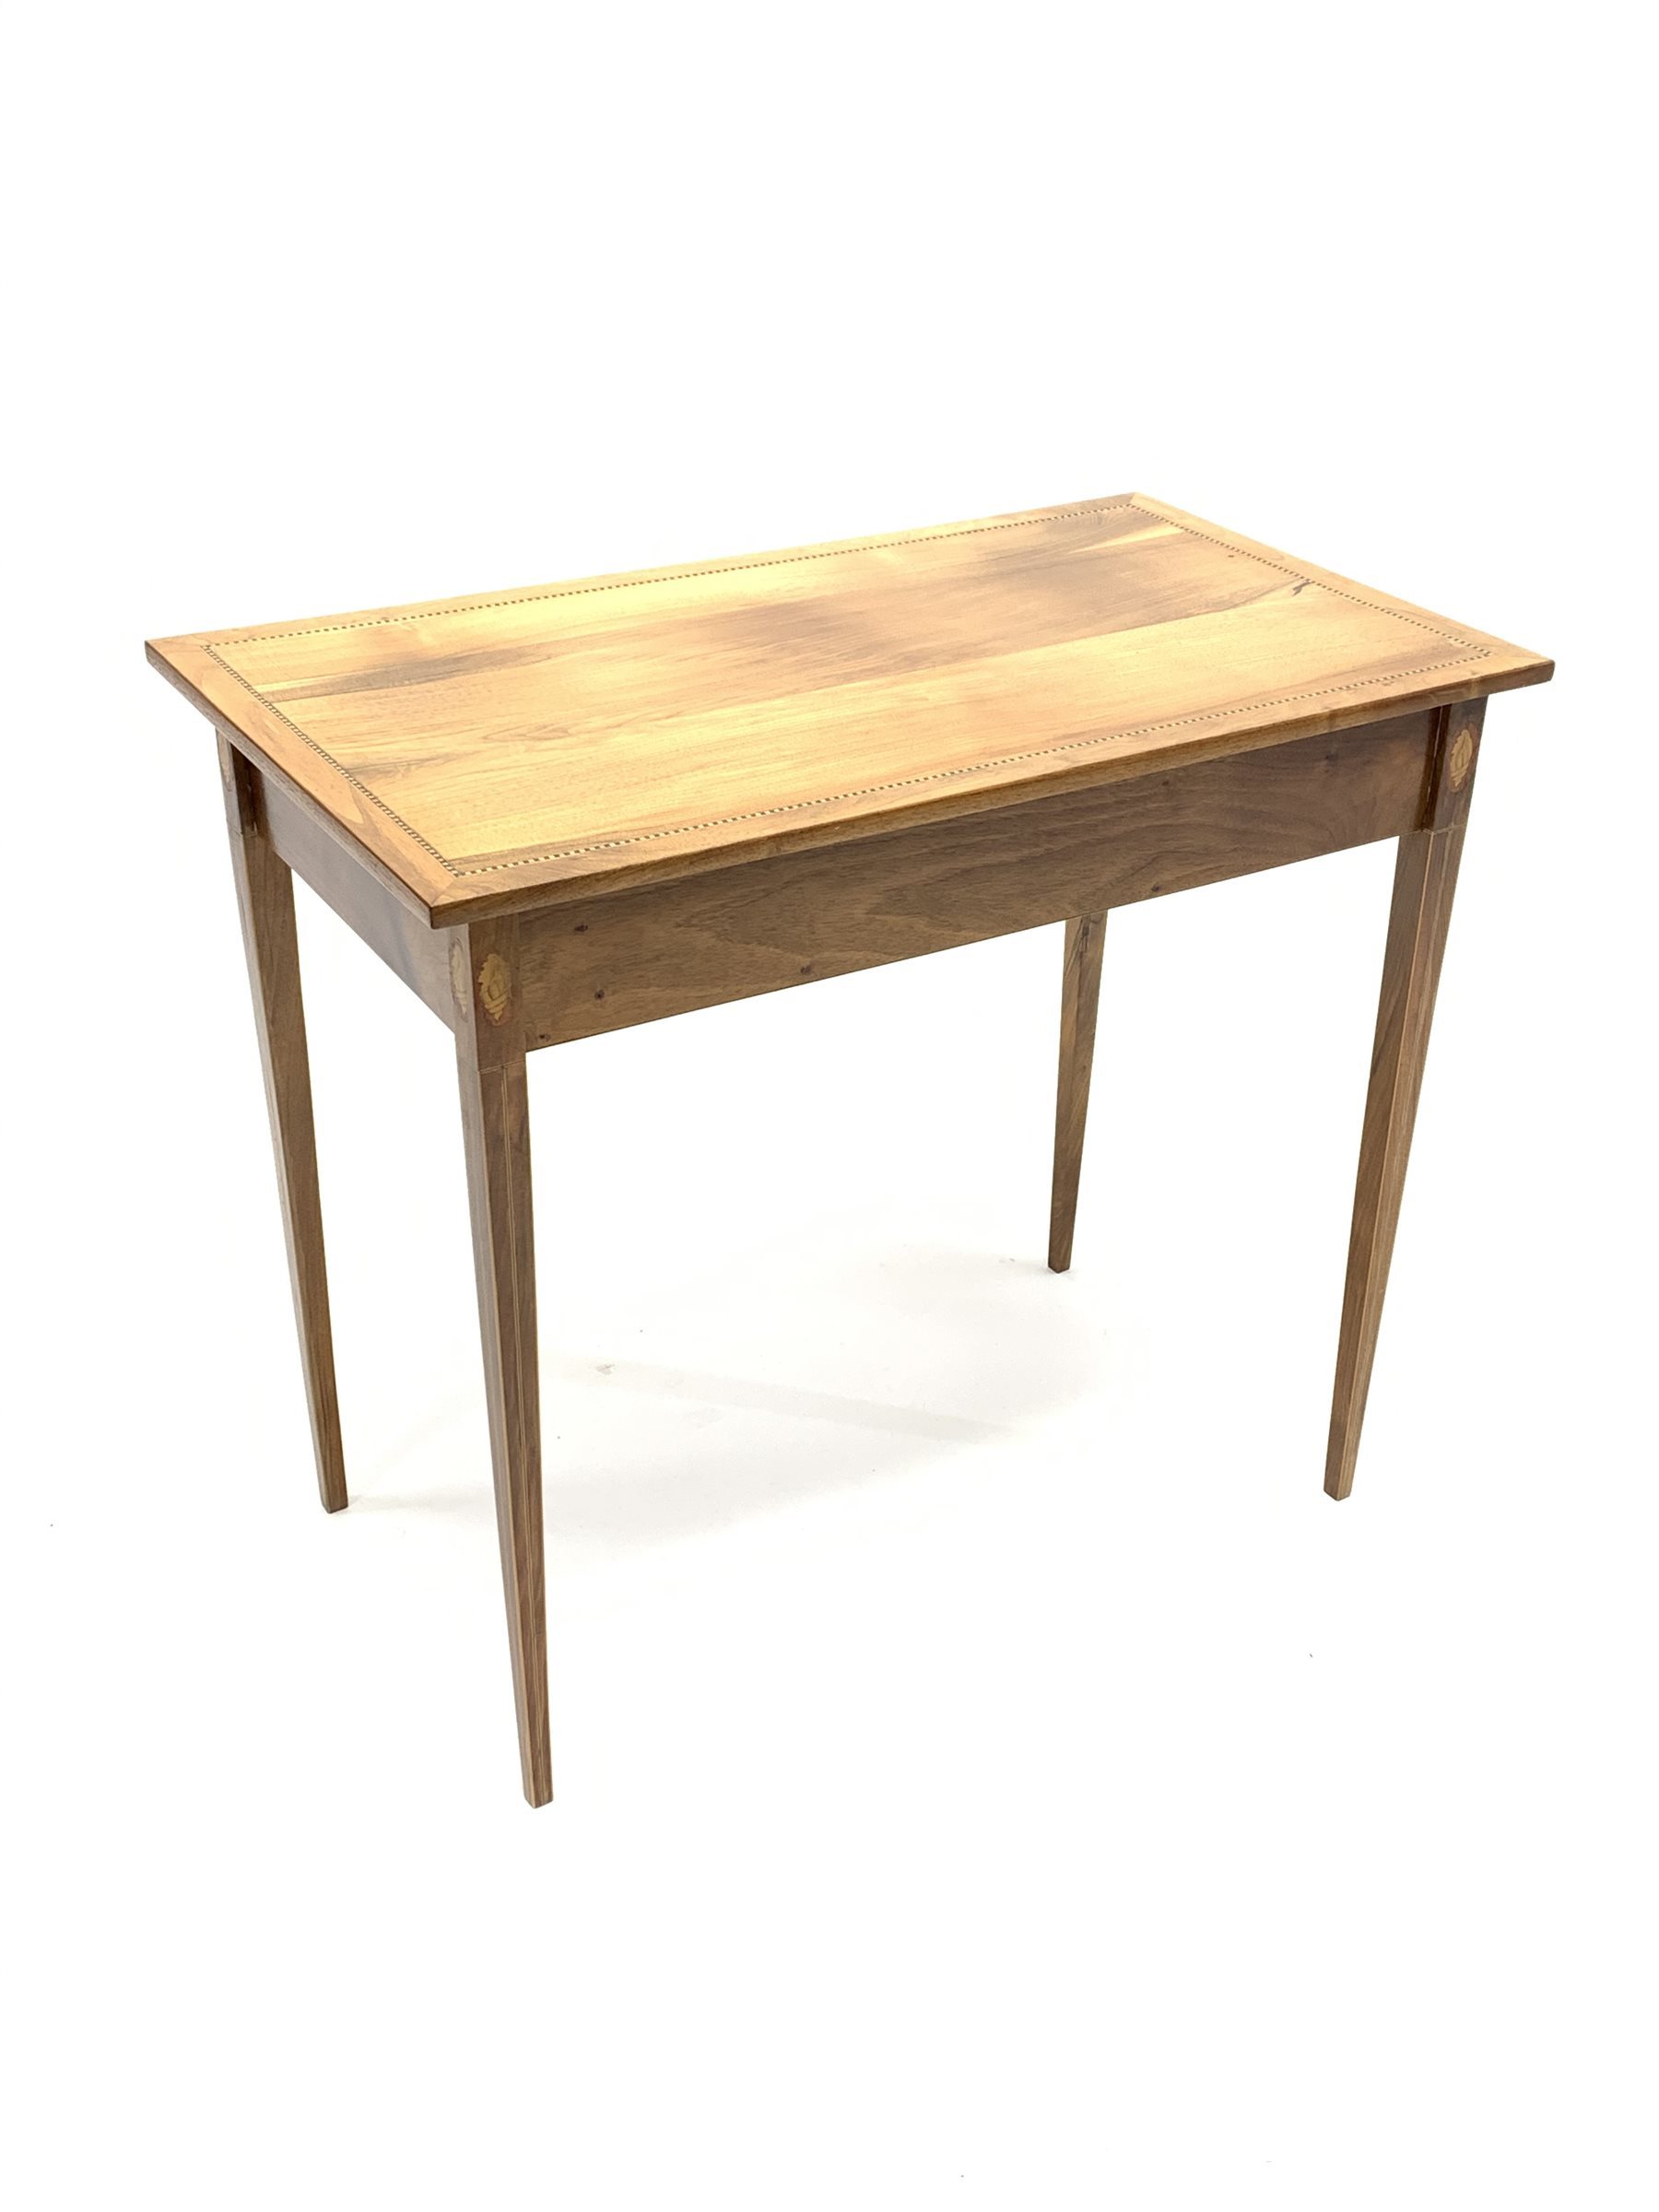 20th century walnut side table, rectangular top inlaid with checkered stringing, square tapering sup